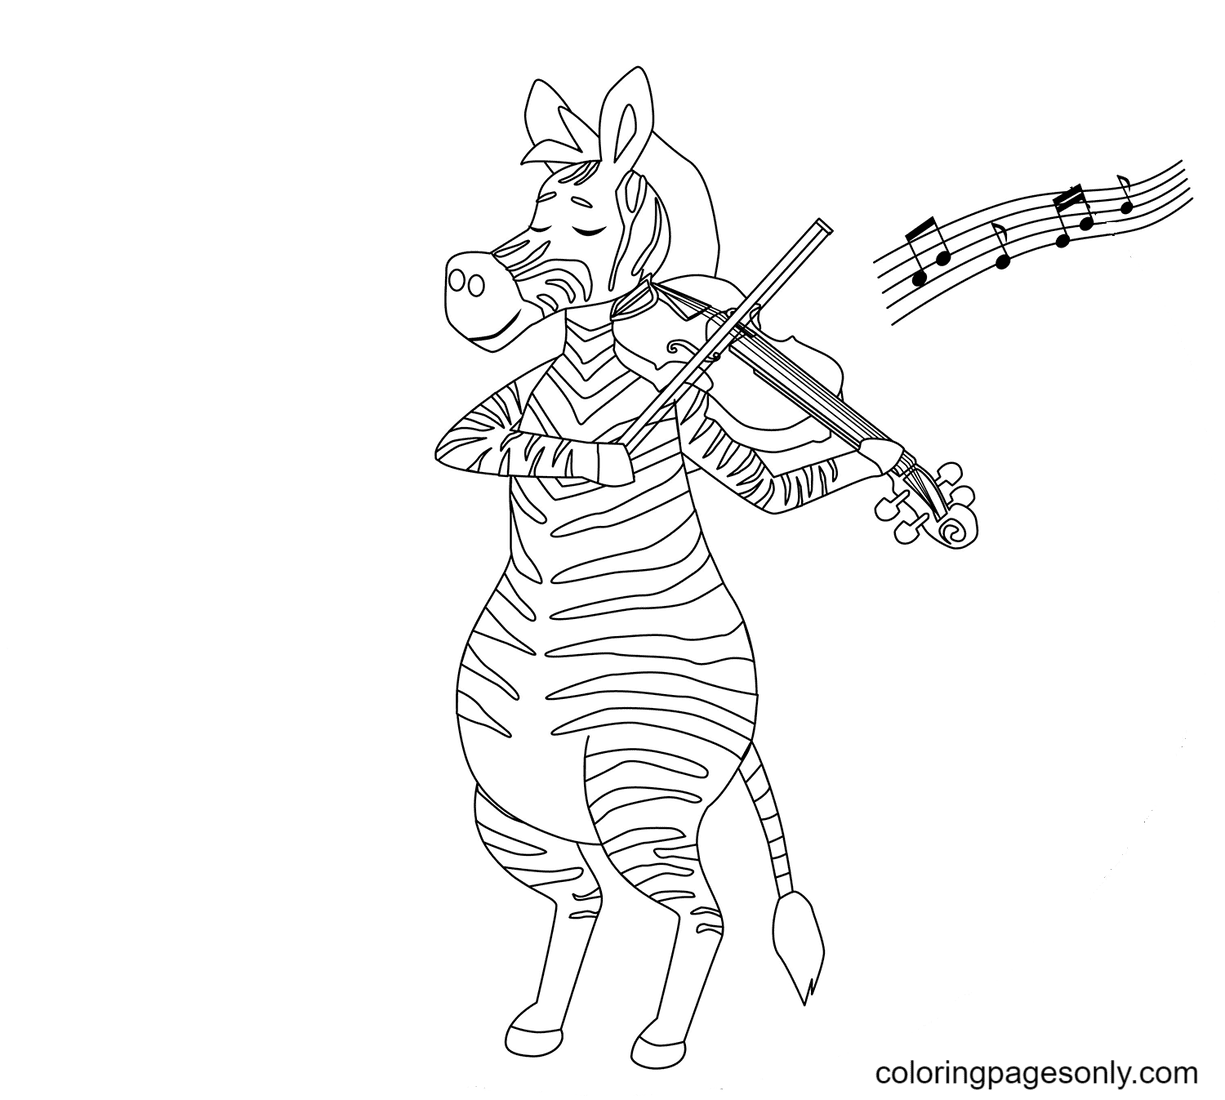 Zebra playing violin Coloring Page